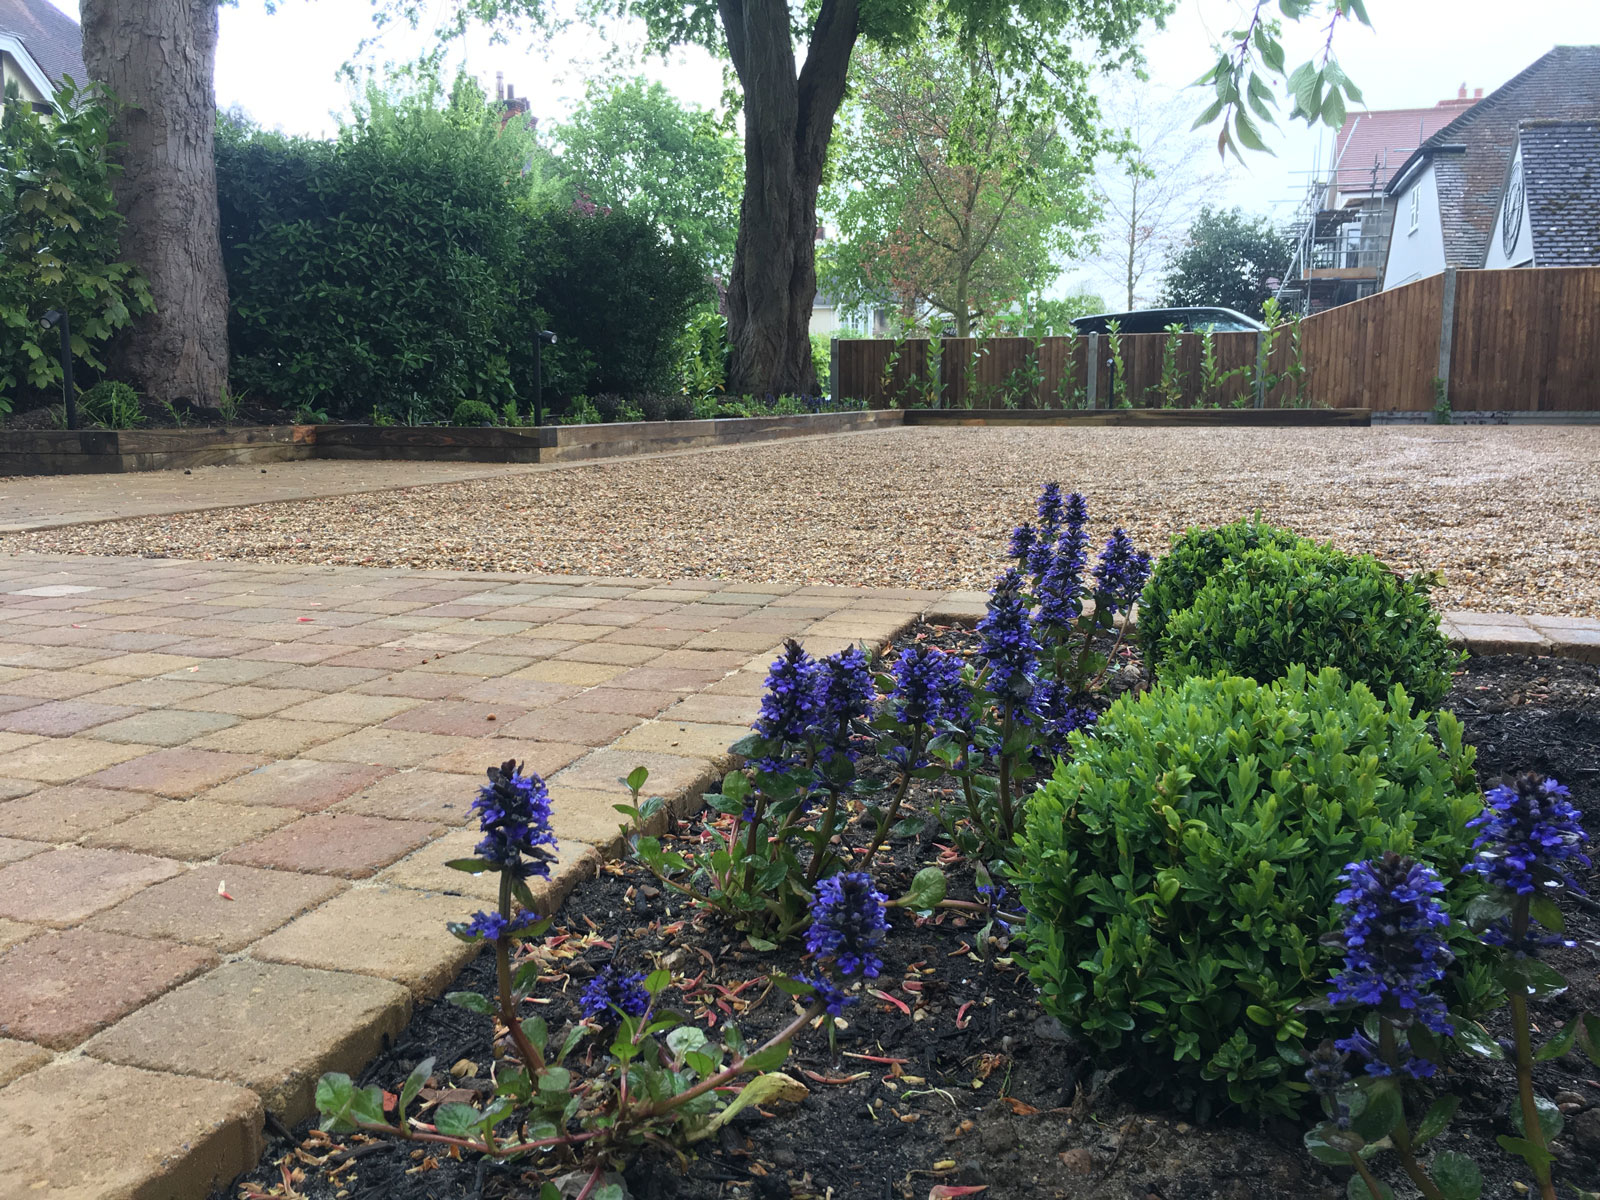 ajuga reptans planted with buxus balls beside sandstone paving